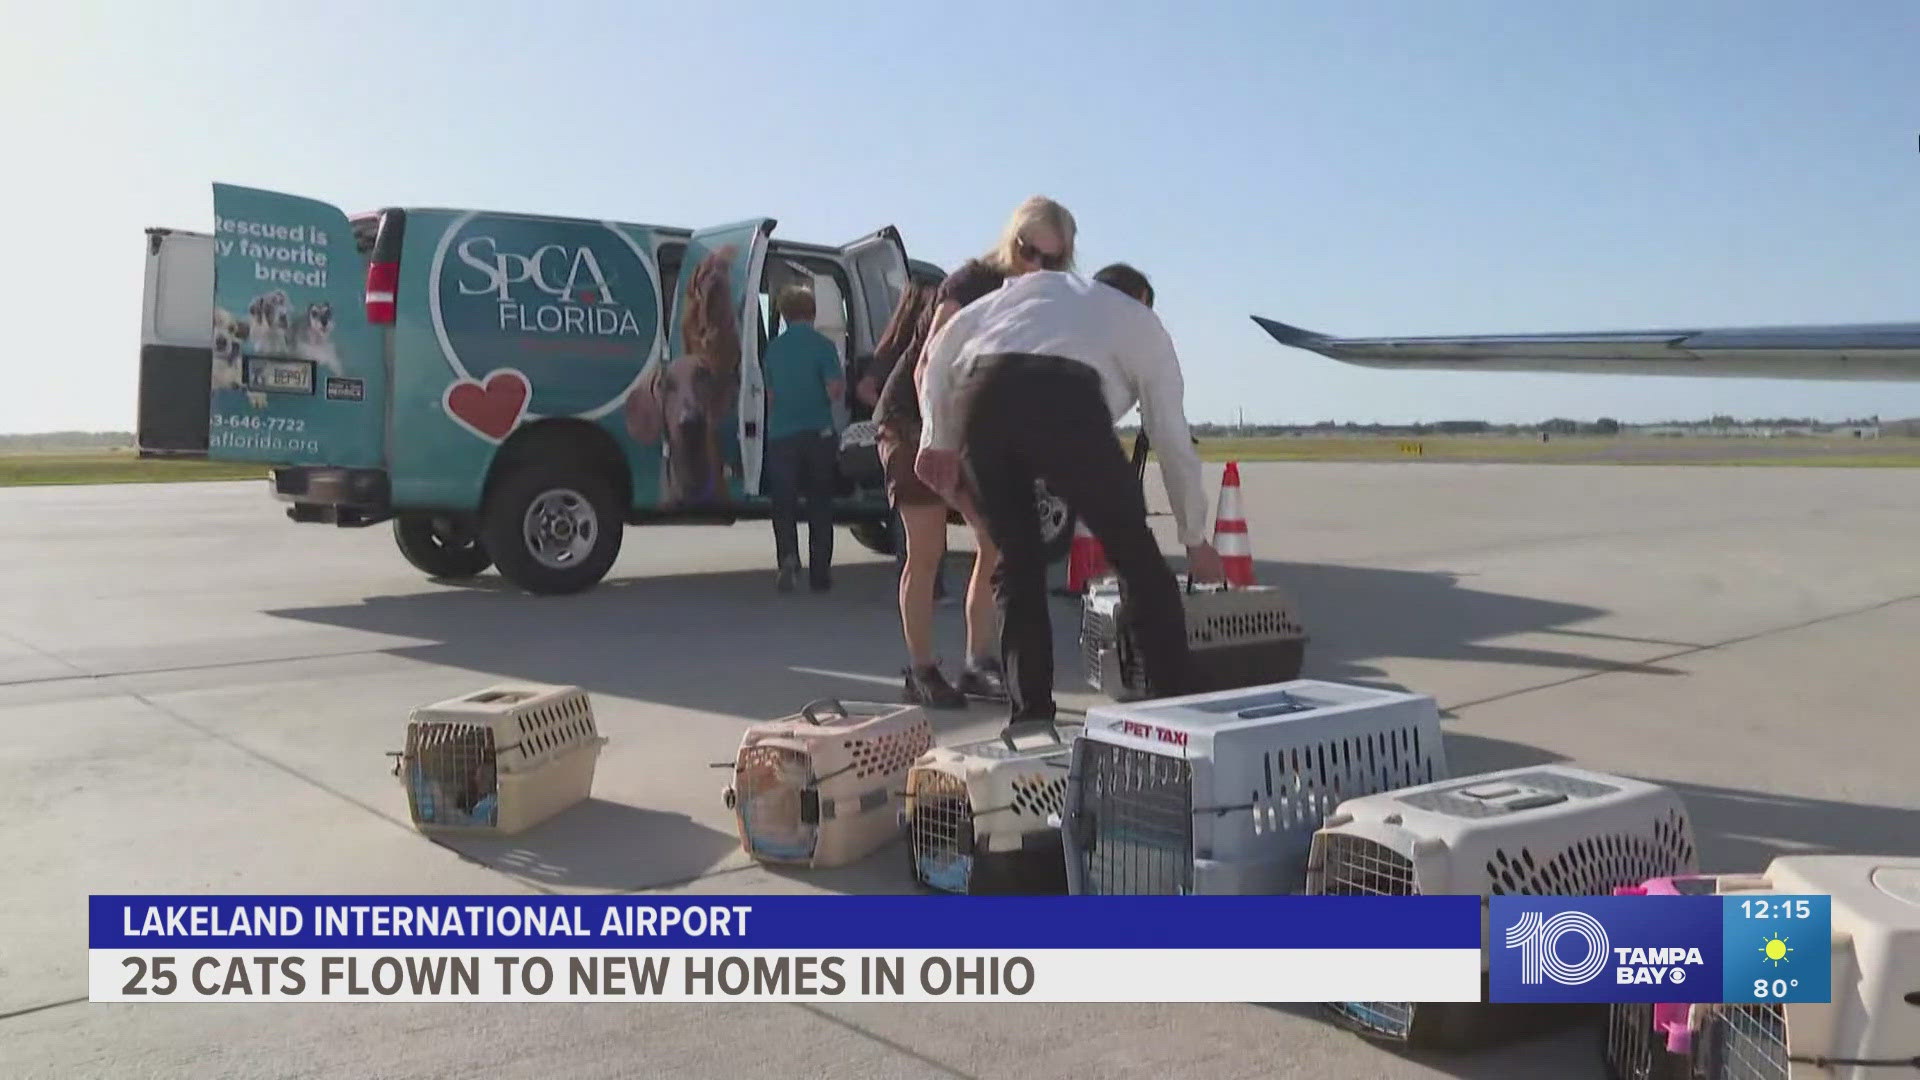 The cats are being taken to shelters in Ohio so they can be adopted into their forever homes while back in Florida the SPCA can rescue more cats without overcrowding